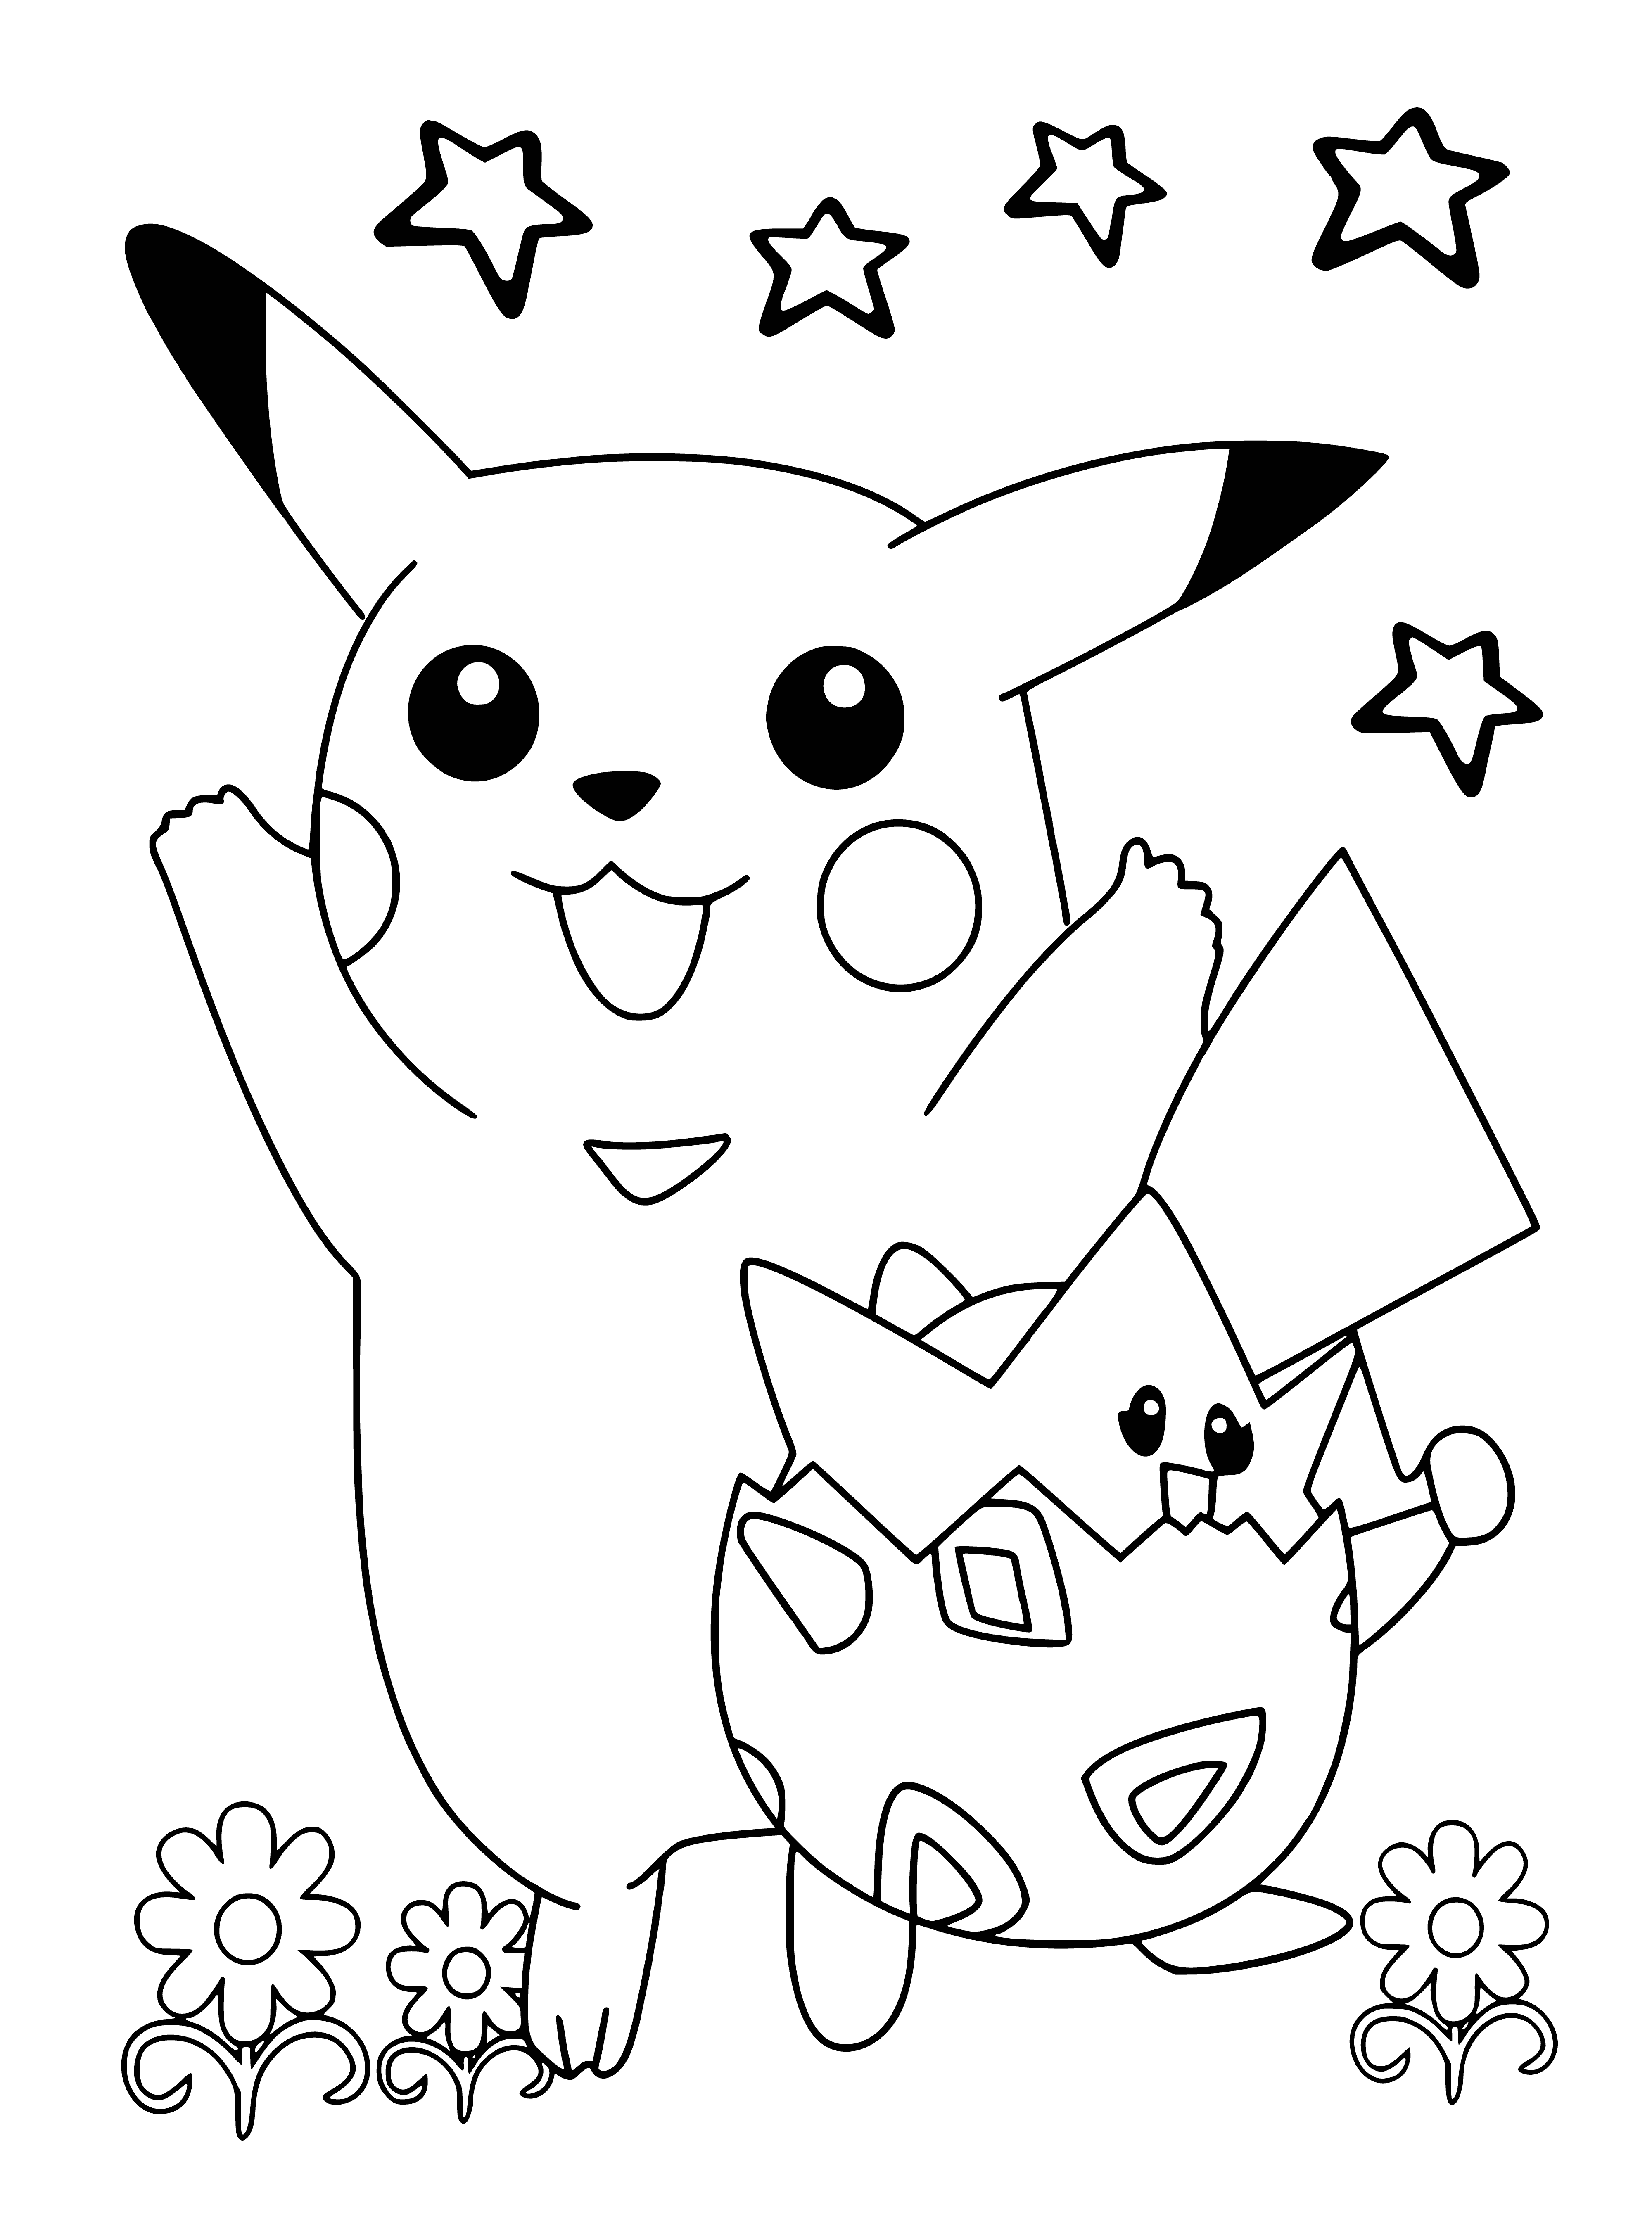 coloring page: Pikachu the yellow Pokemon has two pointed ears, a black stripe, white belly, and red cheeks.